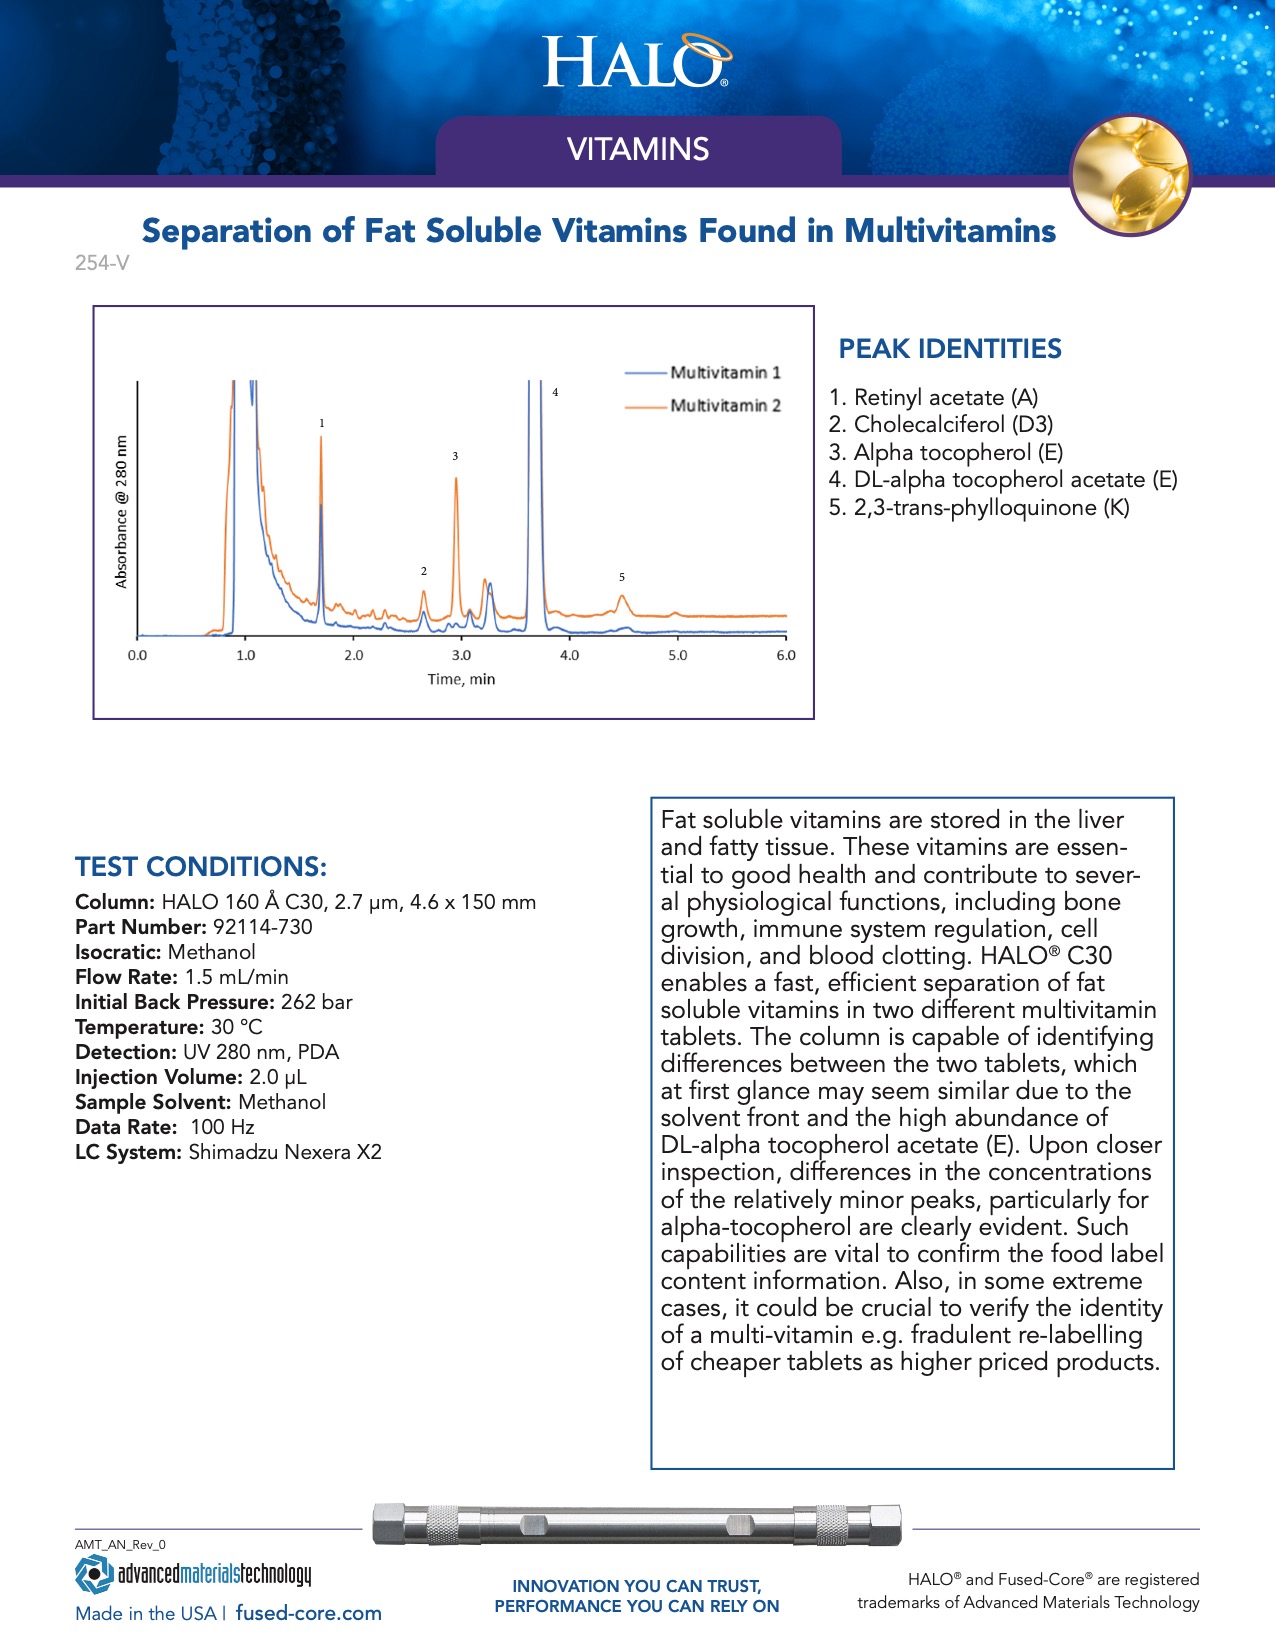 hplc for vitamin analysis - separation of fat soluble vitamins found in multivitamins